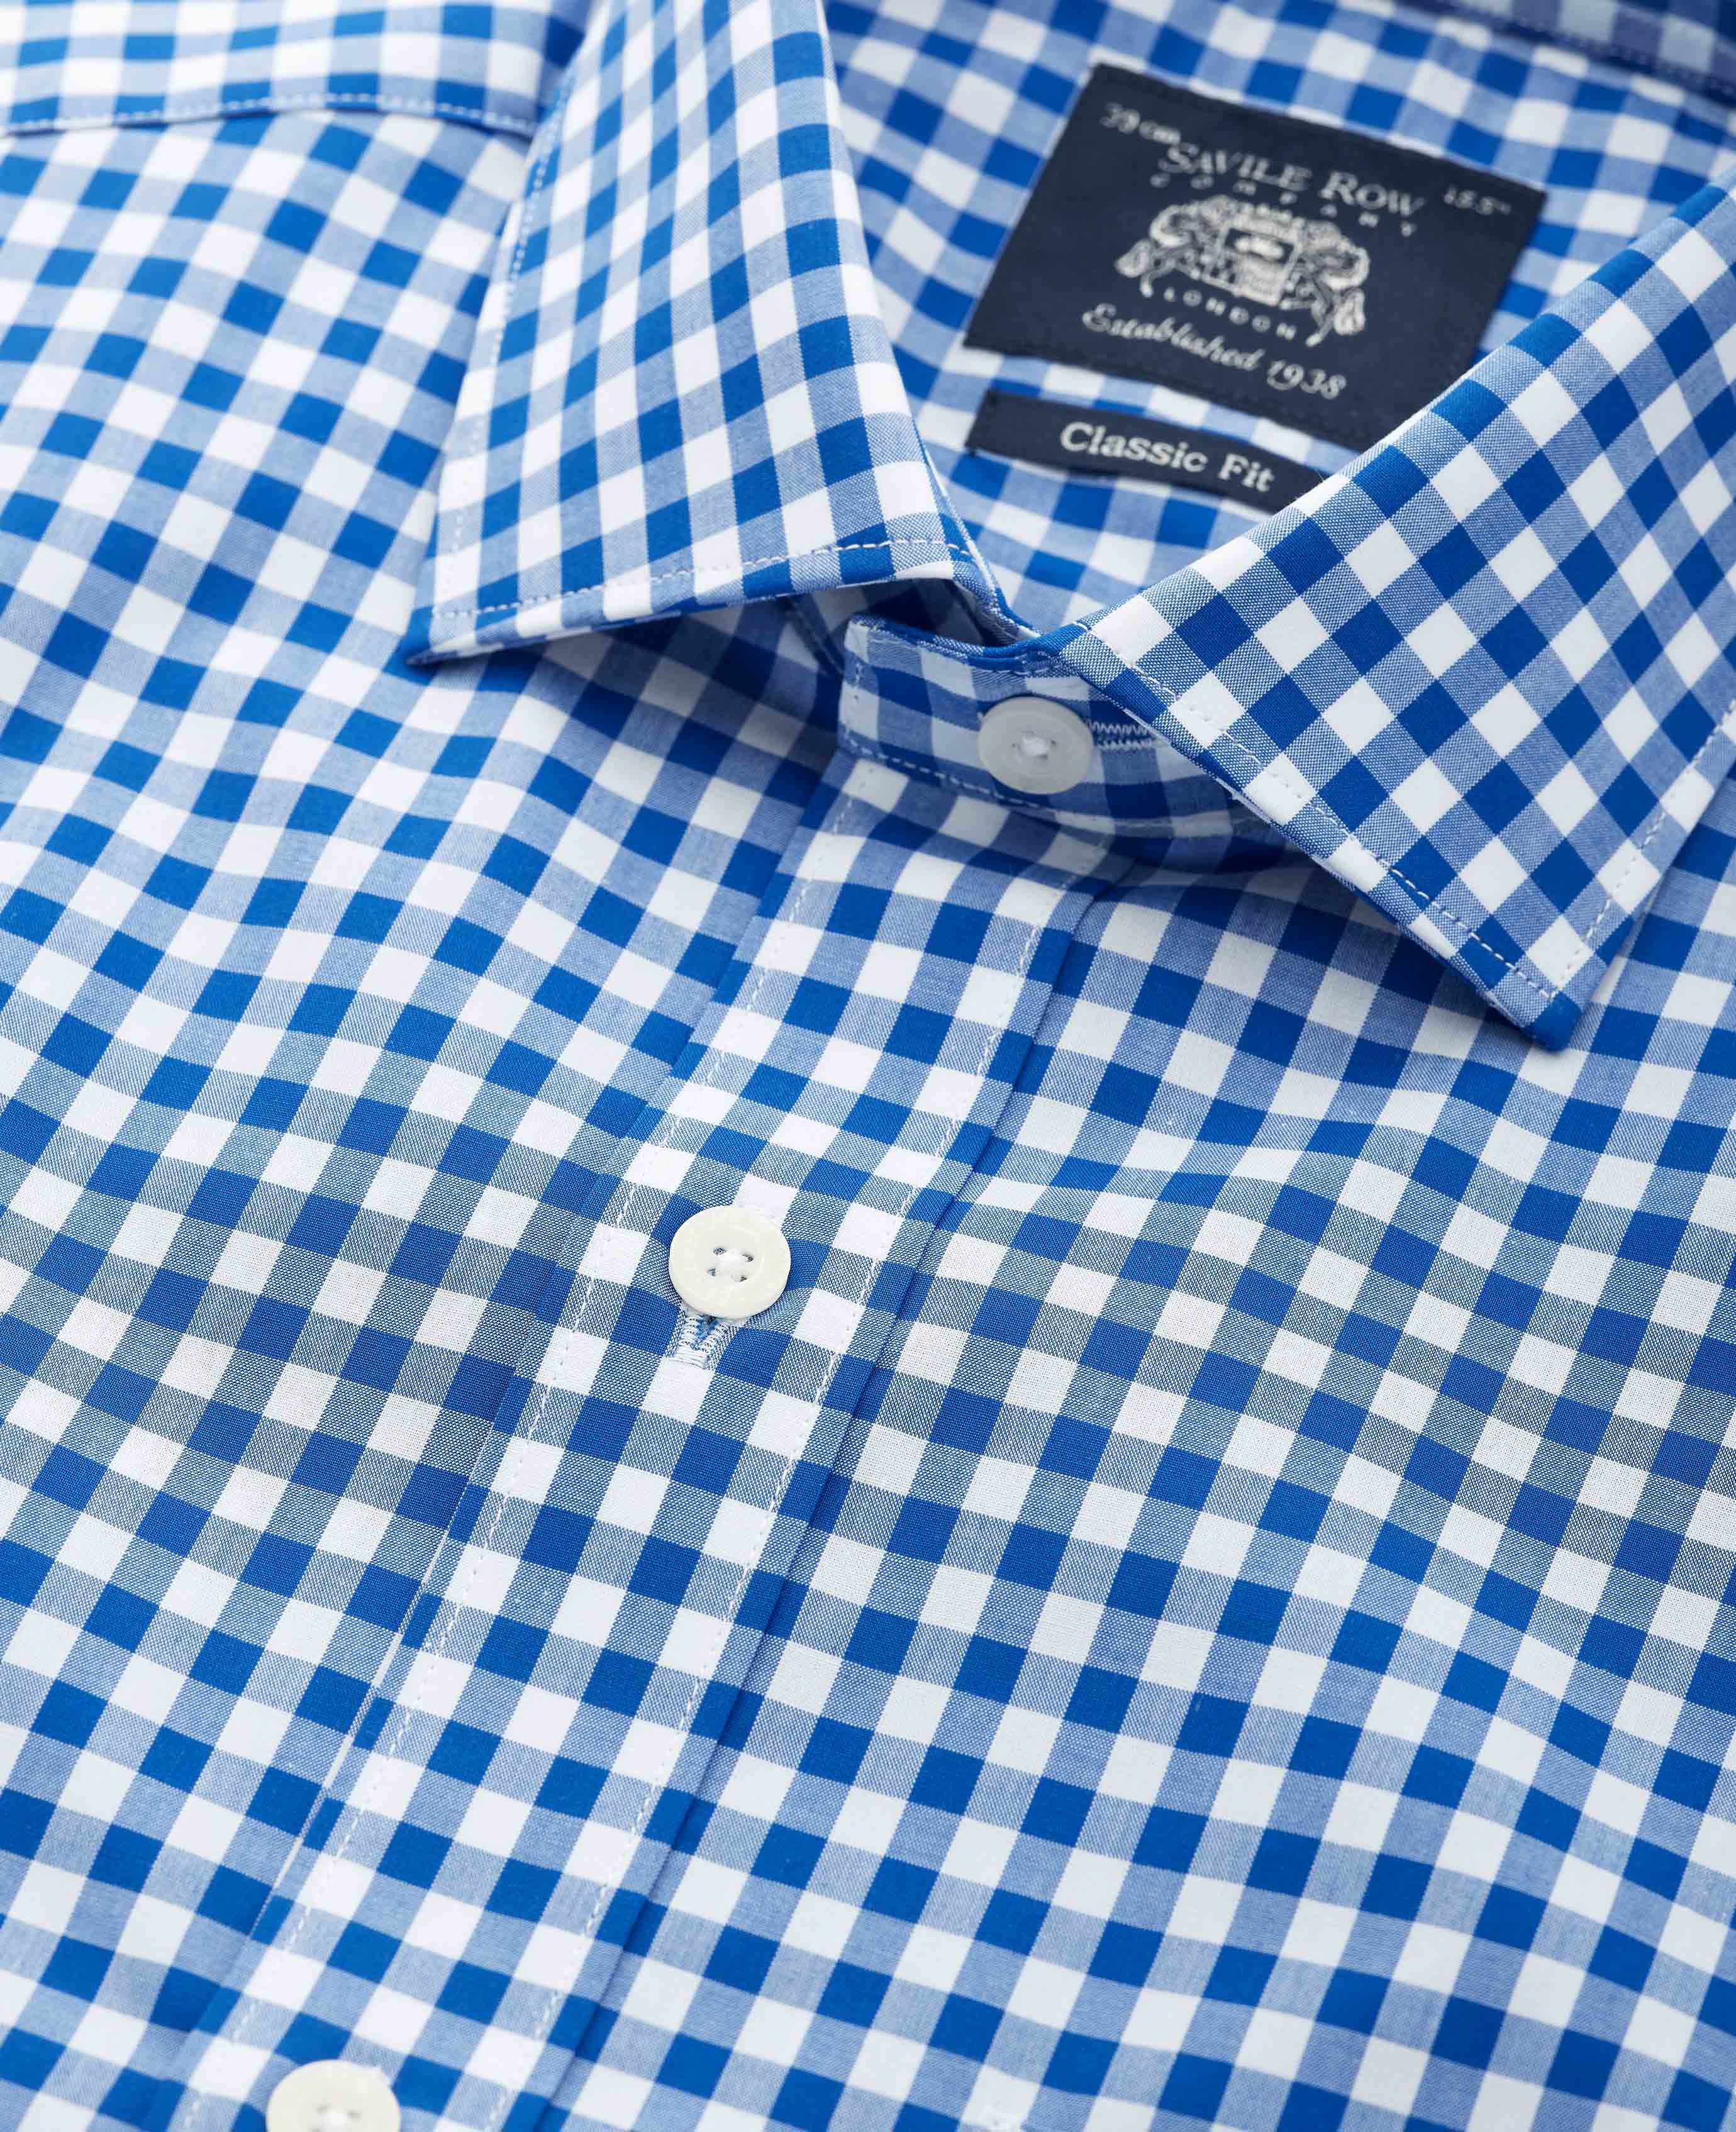 Men’s Classic Fit Gingham Shirt in Blue | Savile Row Co